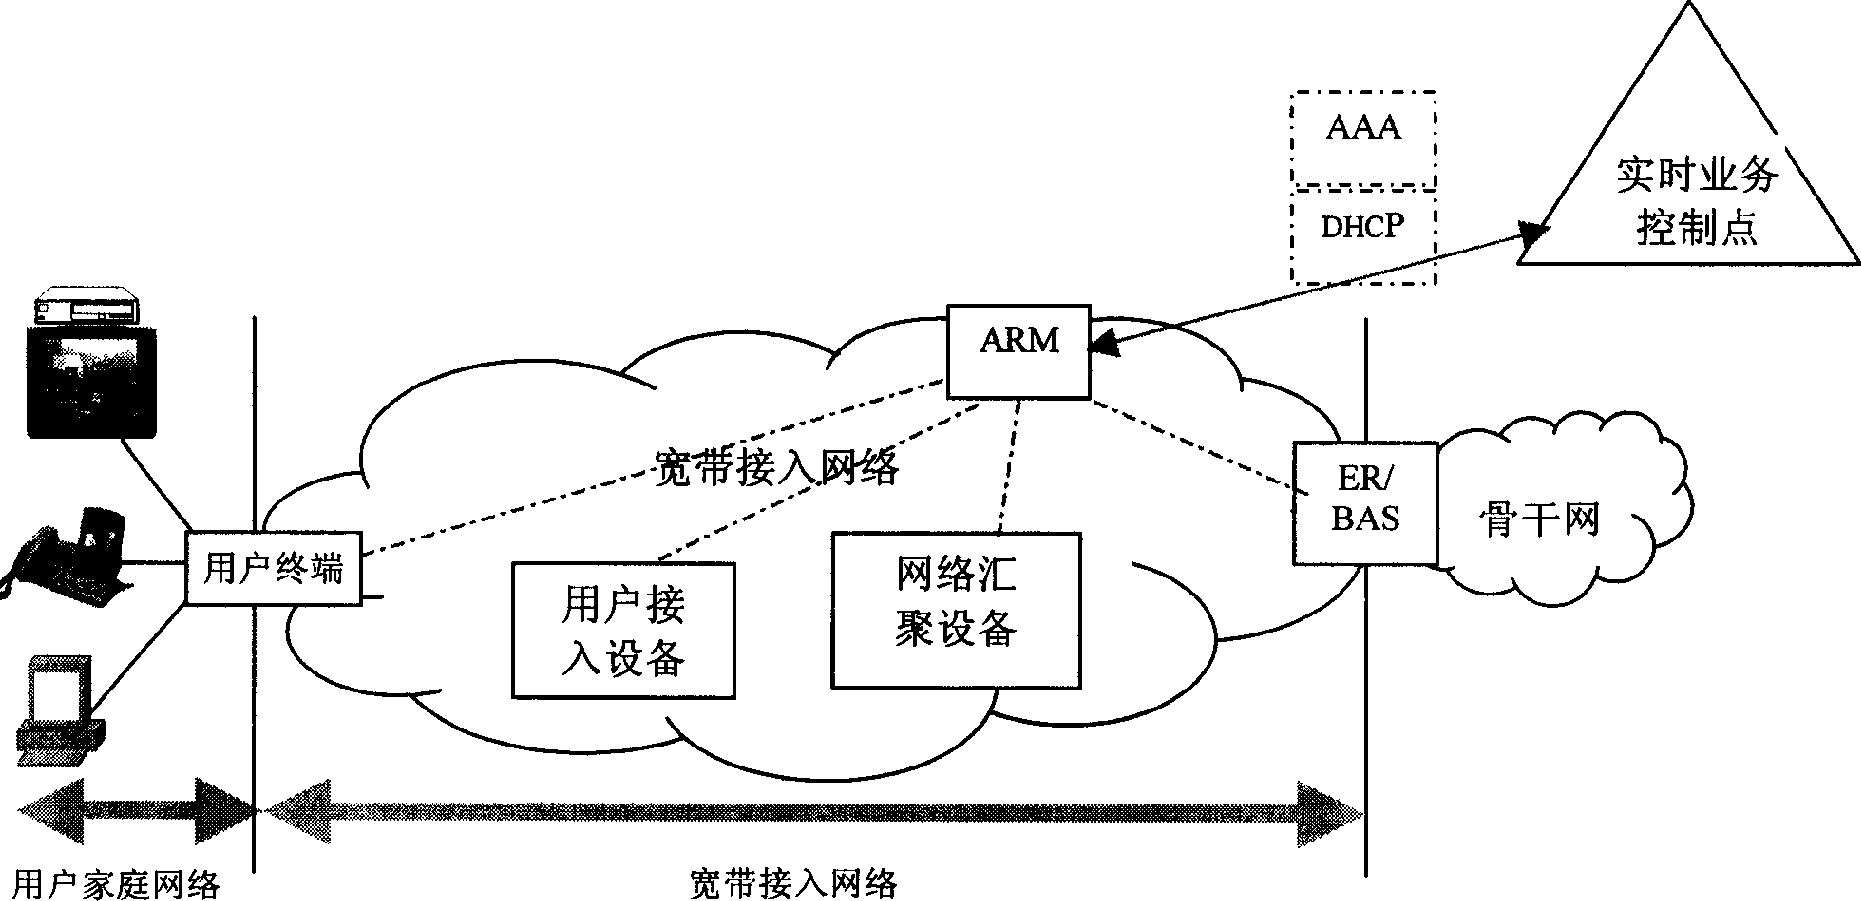 Broadband access network of ensuring QoS of survice, and method